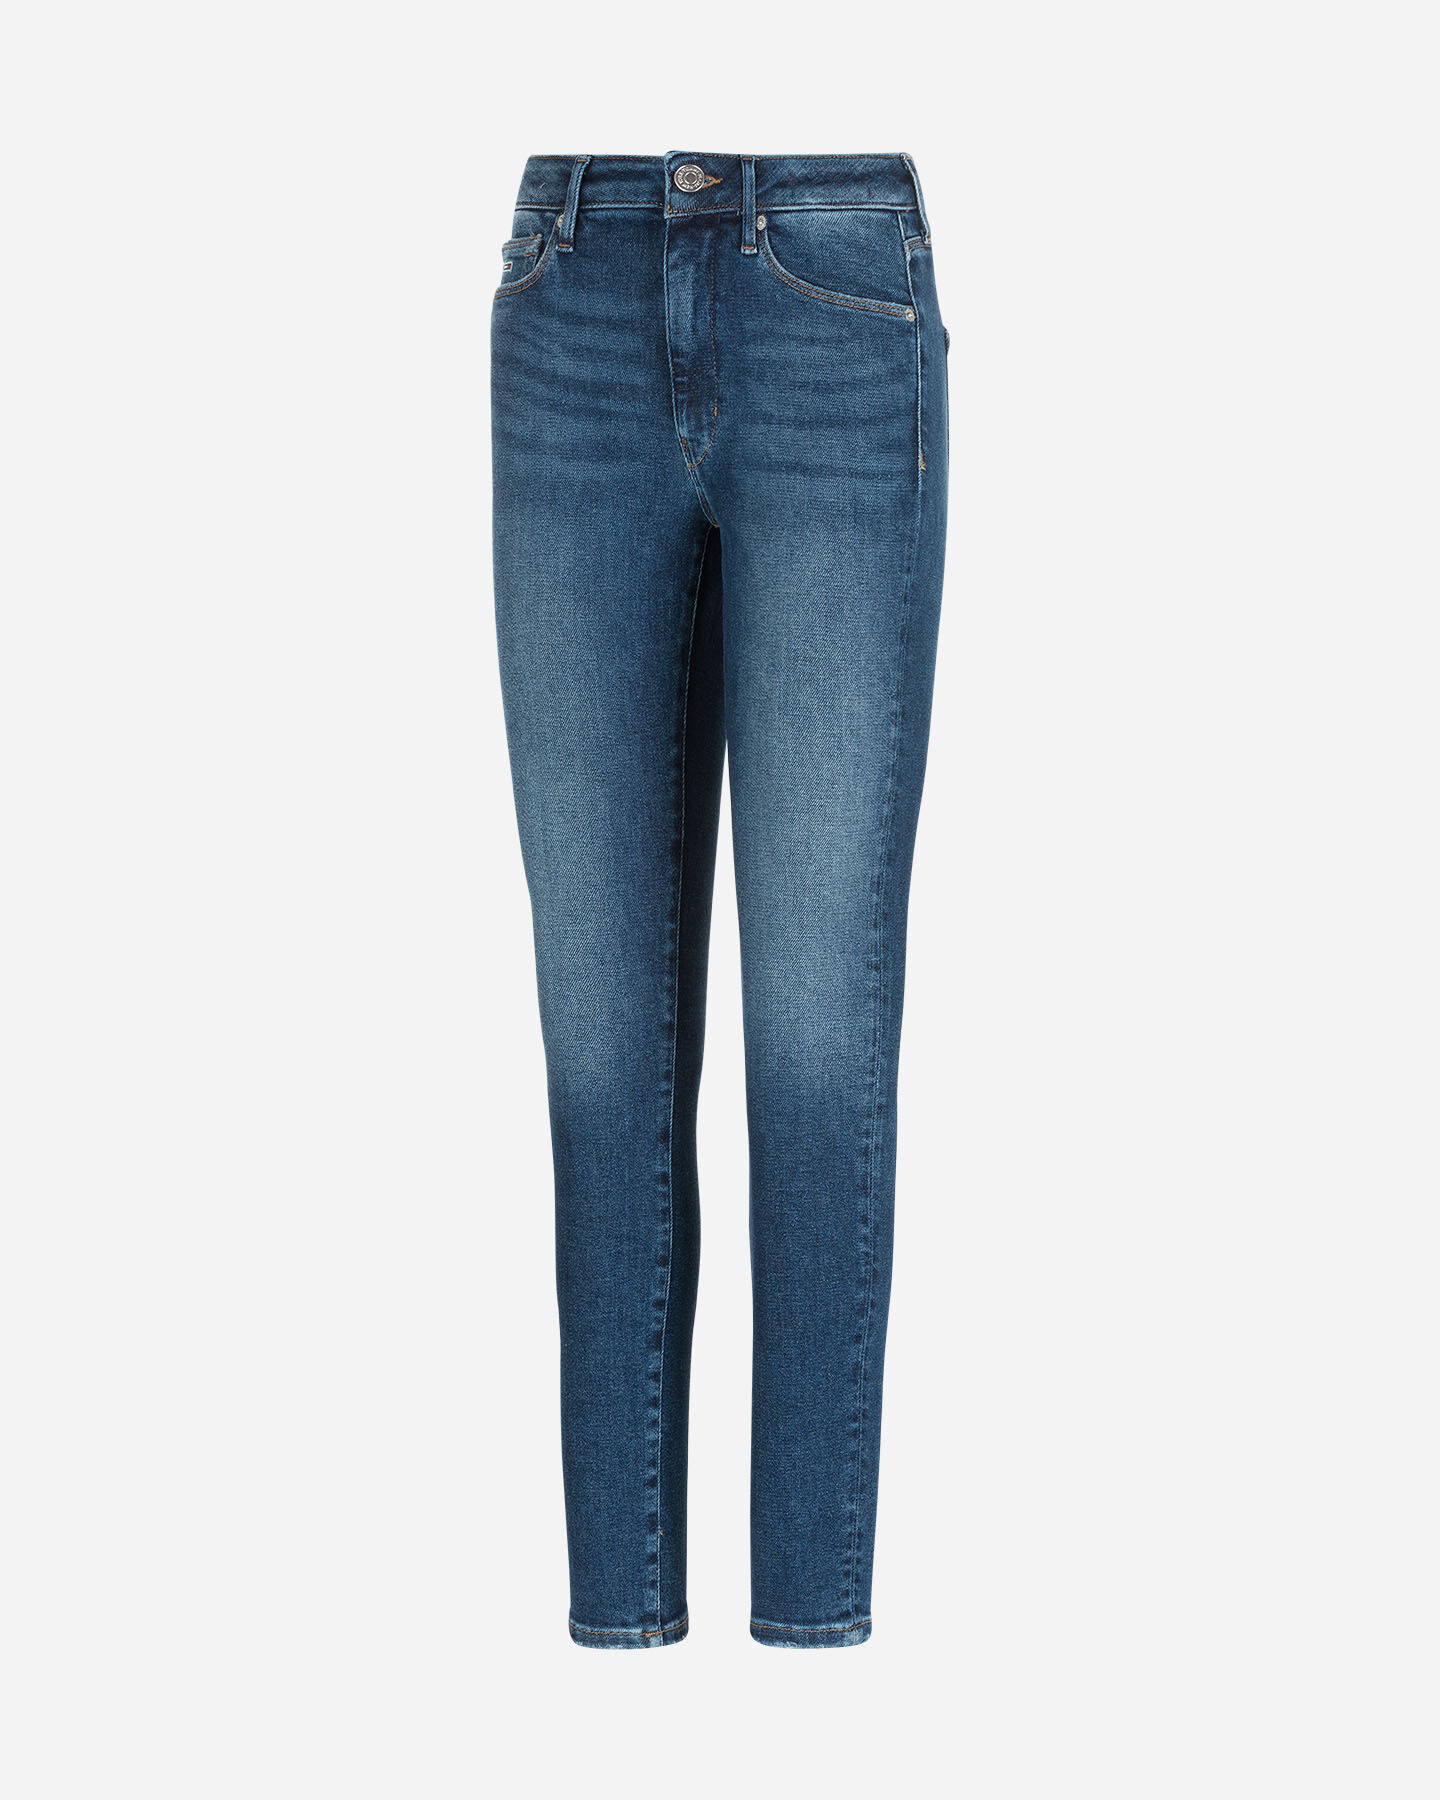  Jeans TOMMY HILFIGER SUPER SKINNY W S4083531|1BJ|26 scatto 0